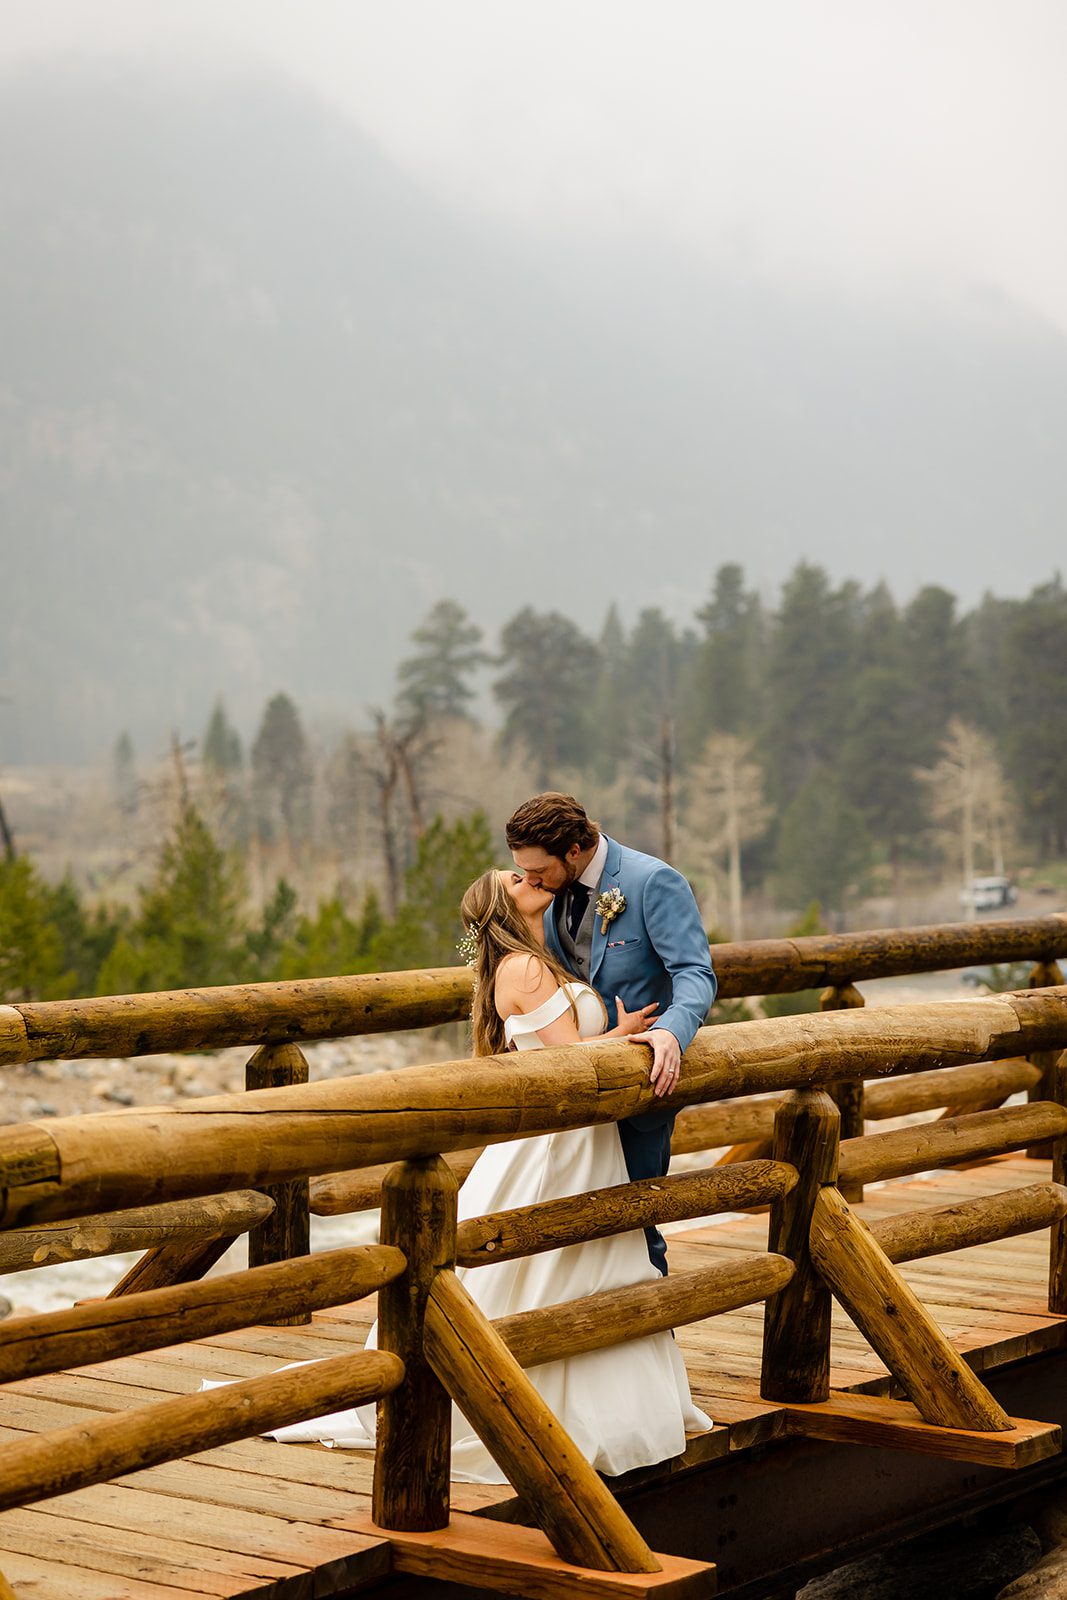 Bride and Groom Colorado Elopement photos at at Alluvial Fan Bridge in Rocky Mountain National Park